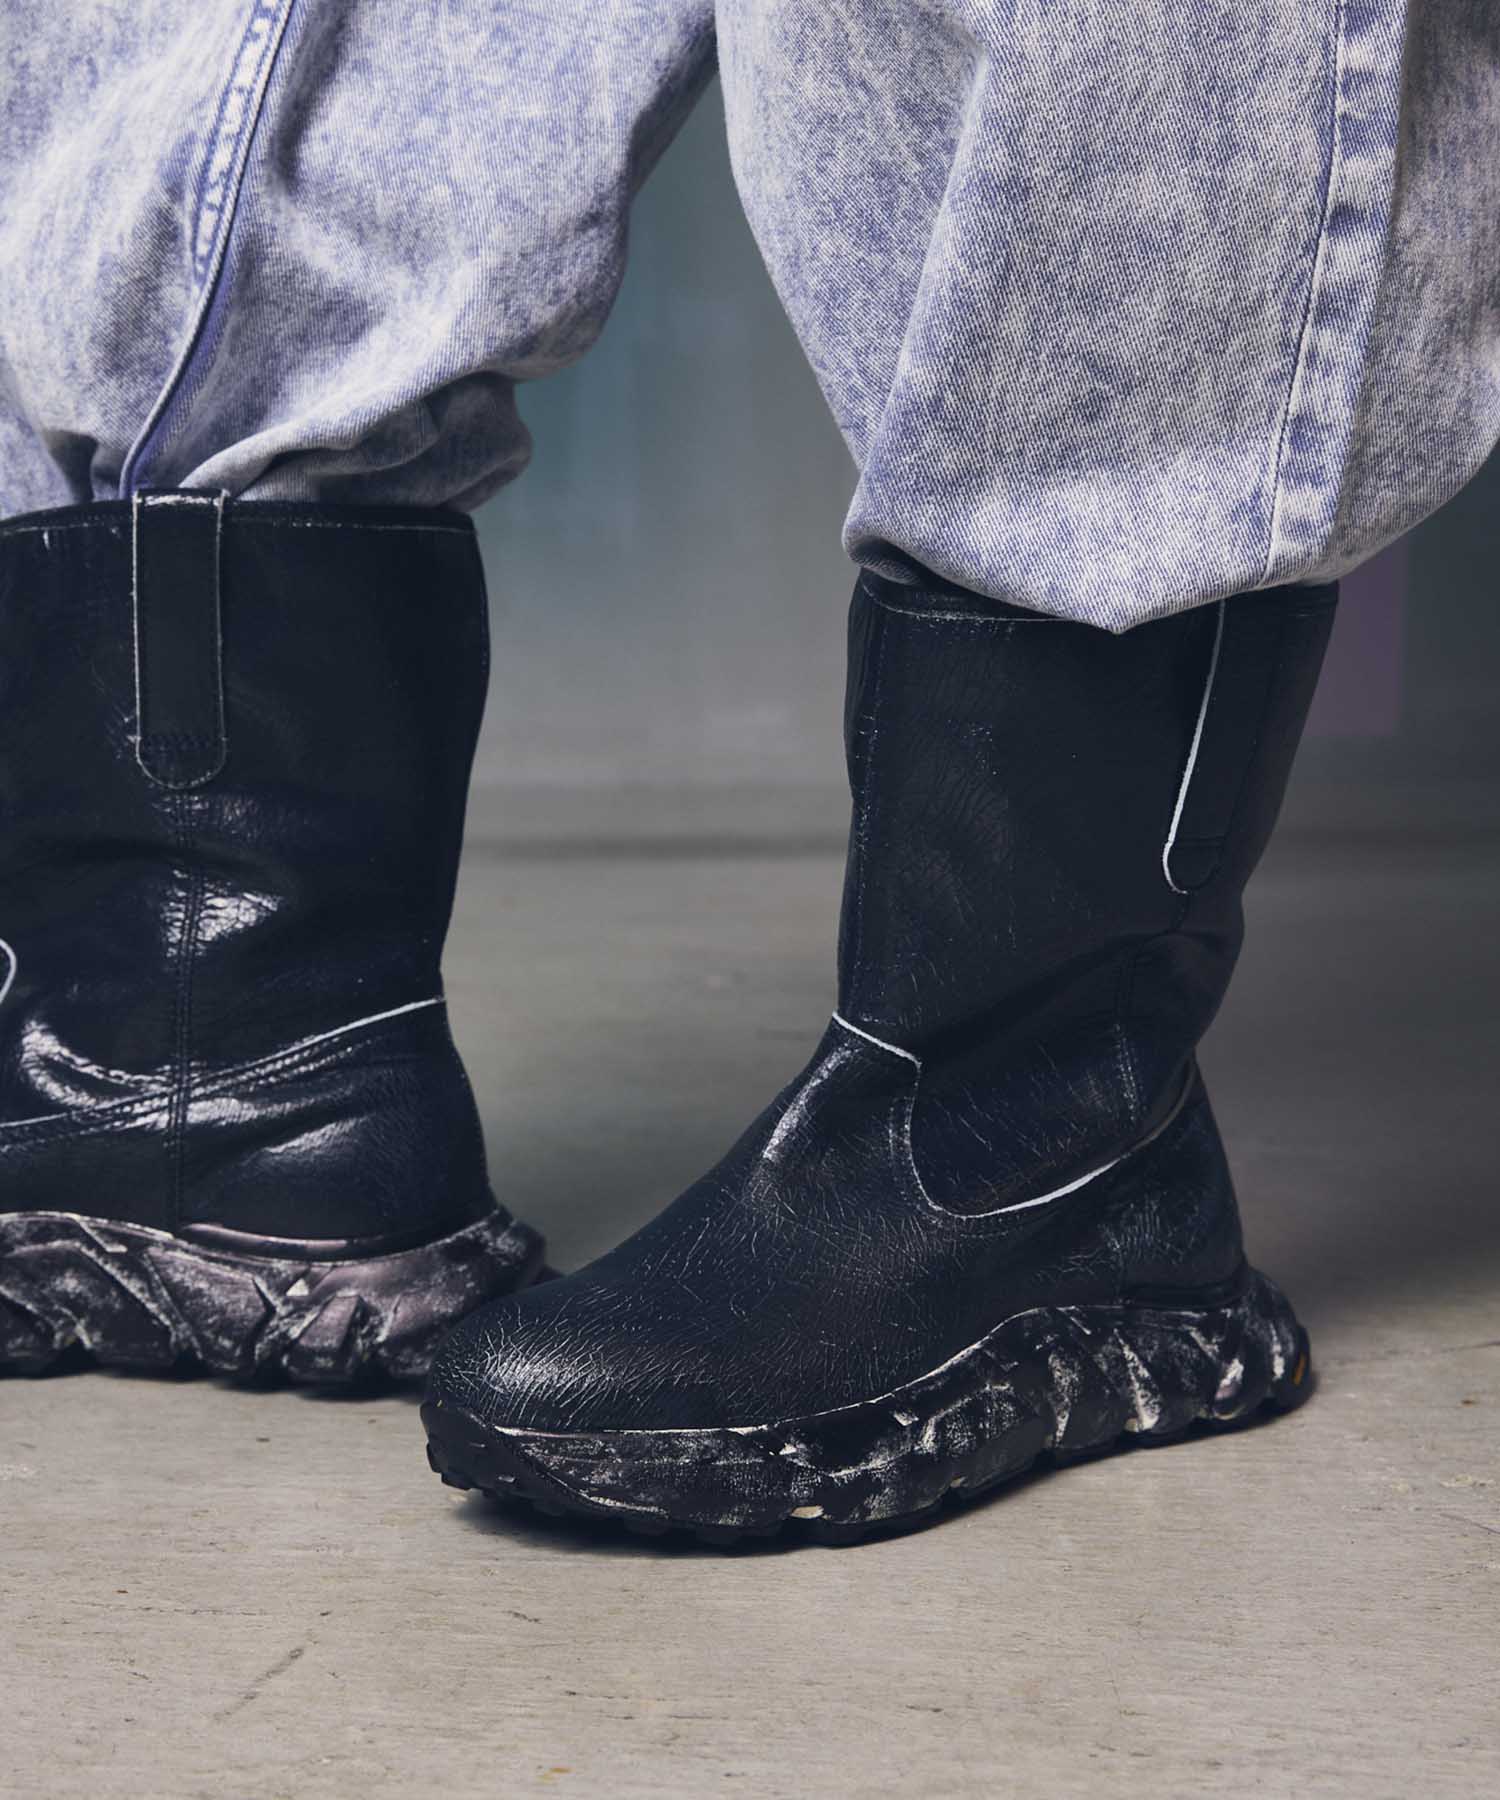 [Special SHOES FACTORY COLLABORATION] VIBRAM SOLE PECOS BOOTS MADE in Tokyo